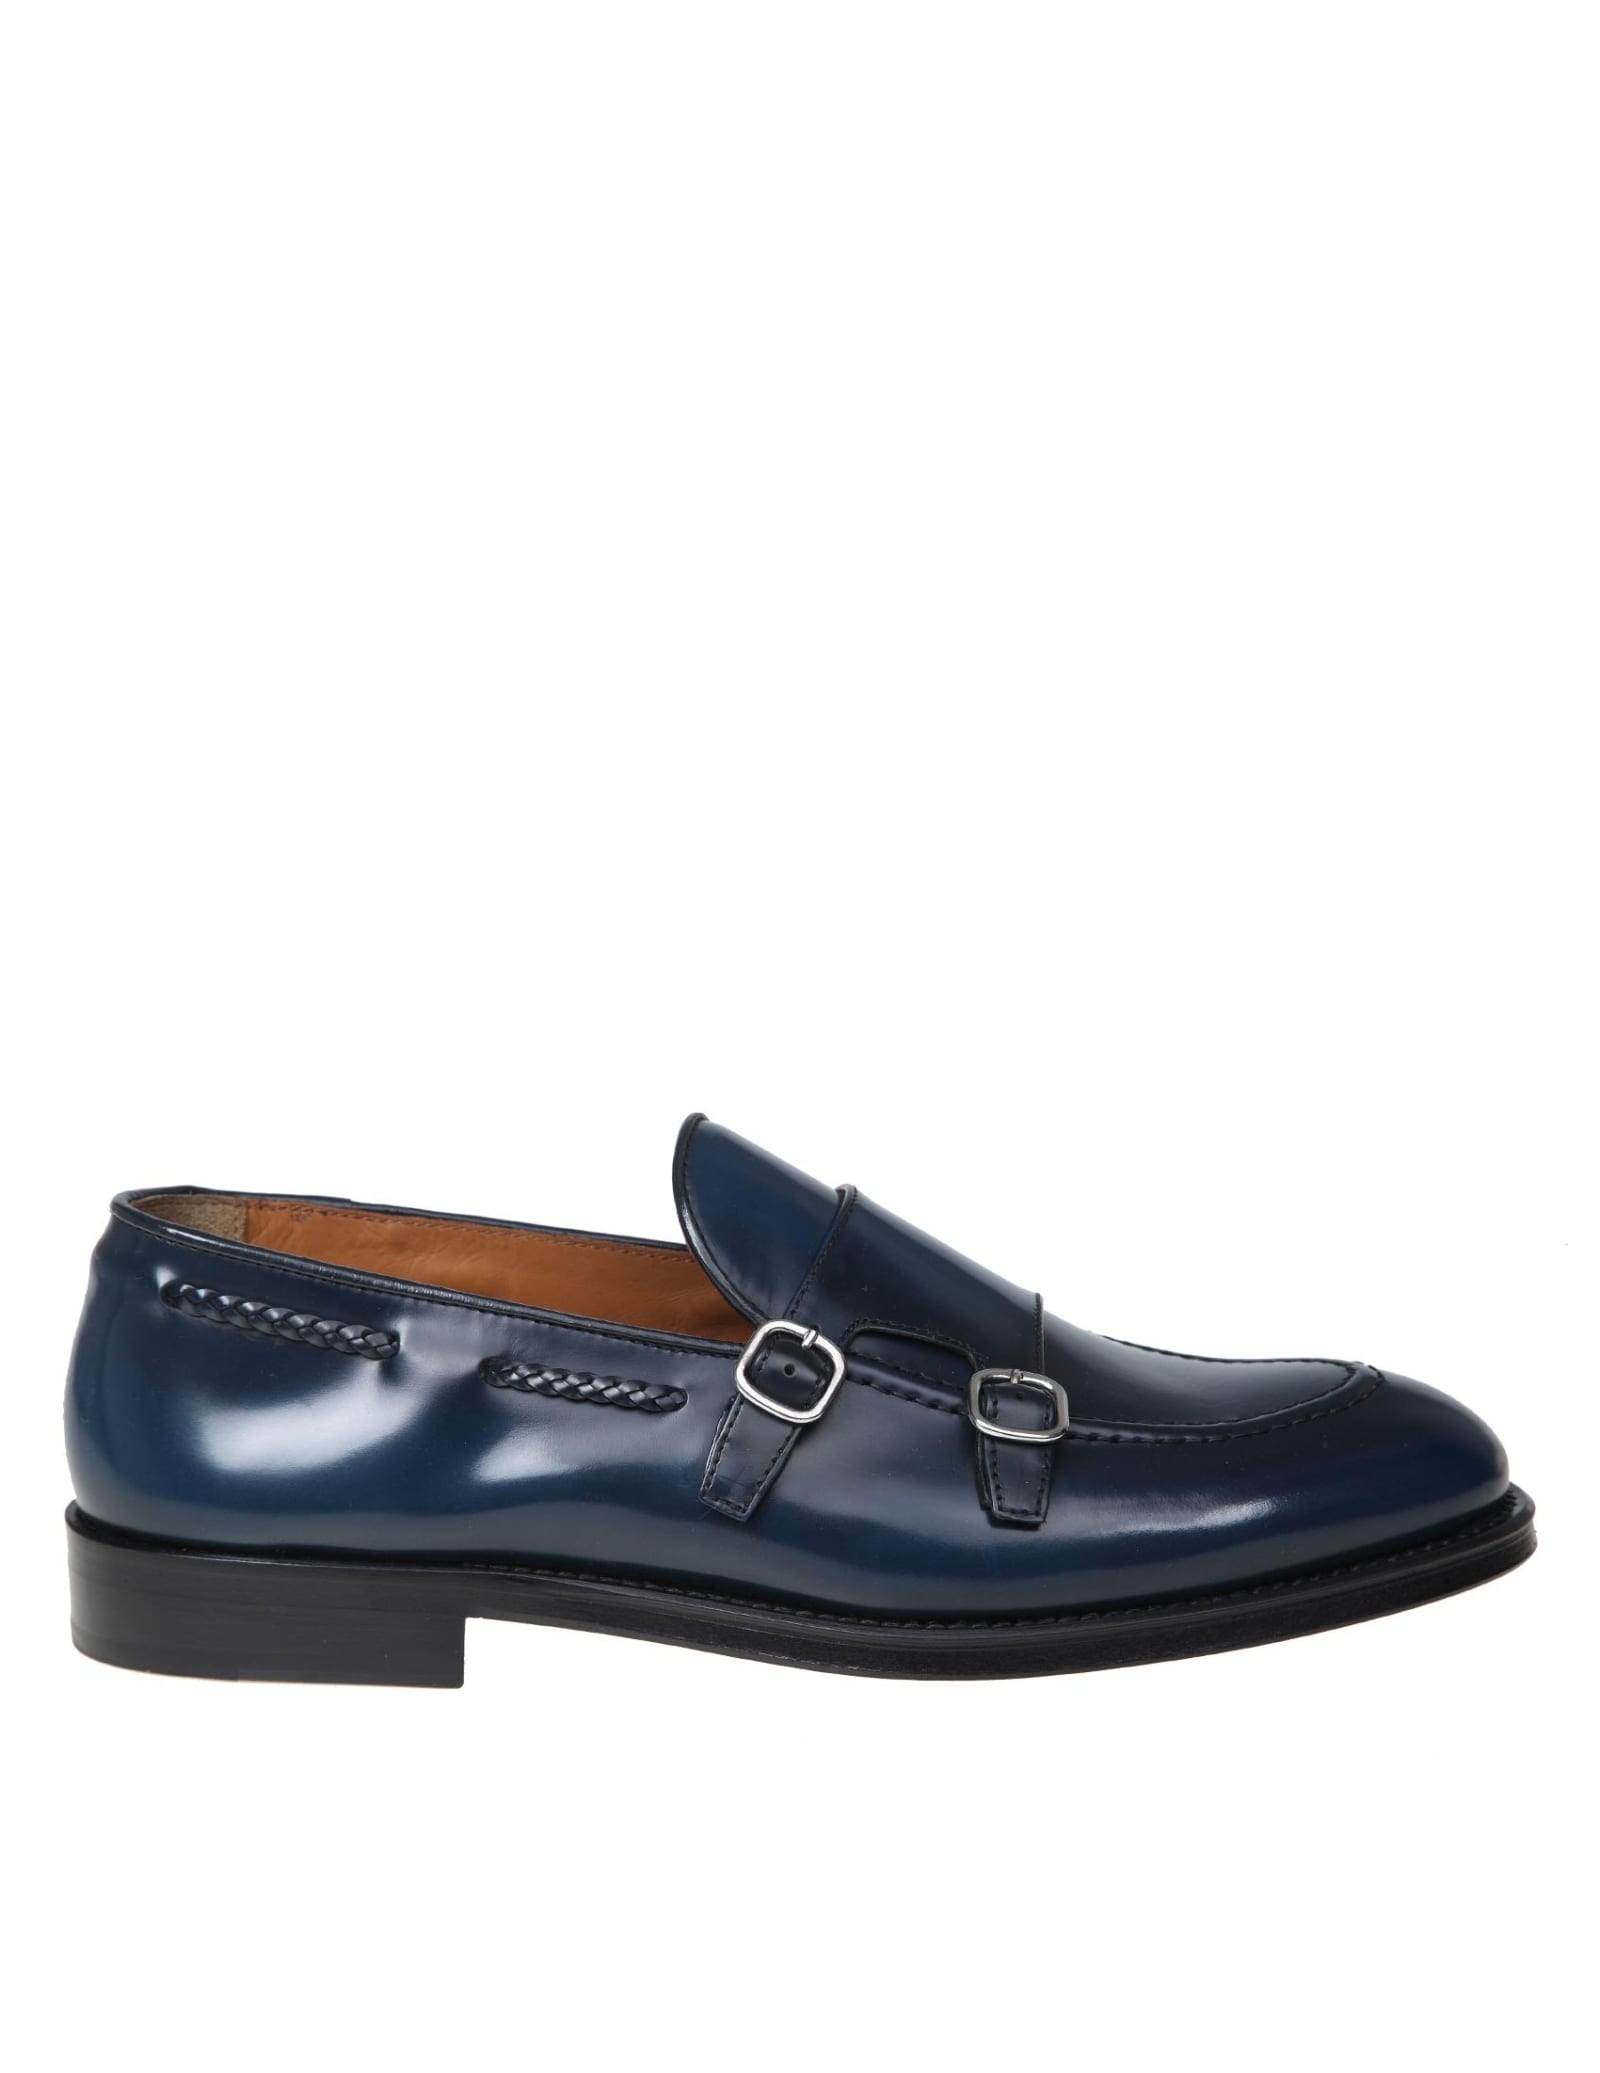 DOUCAL'S DOUBLE BUCKLE MOCCASIN IN BLUE CALFSKIN